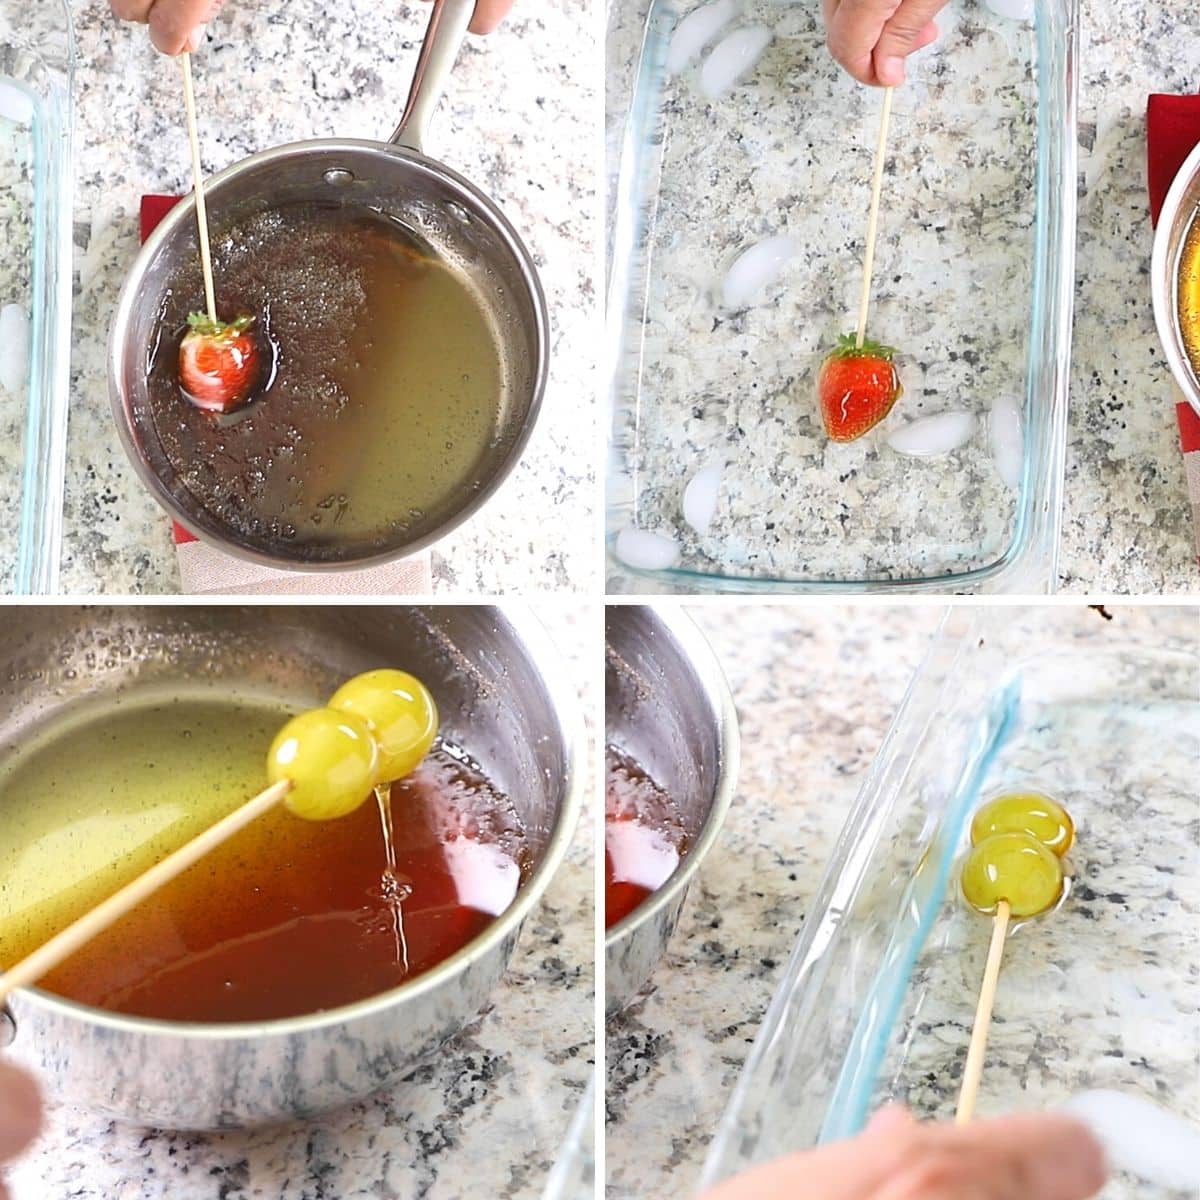 A collage of 4 images showing how to dip fresh fruits in tanghulu sugar syrup.